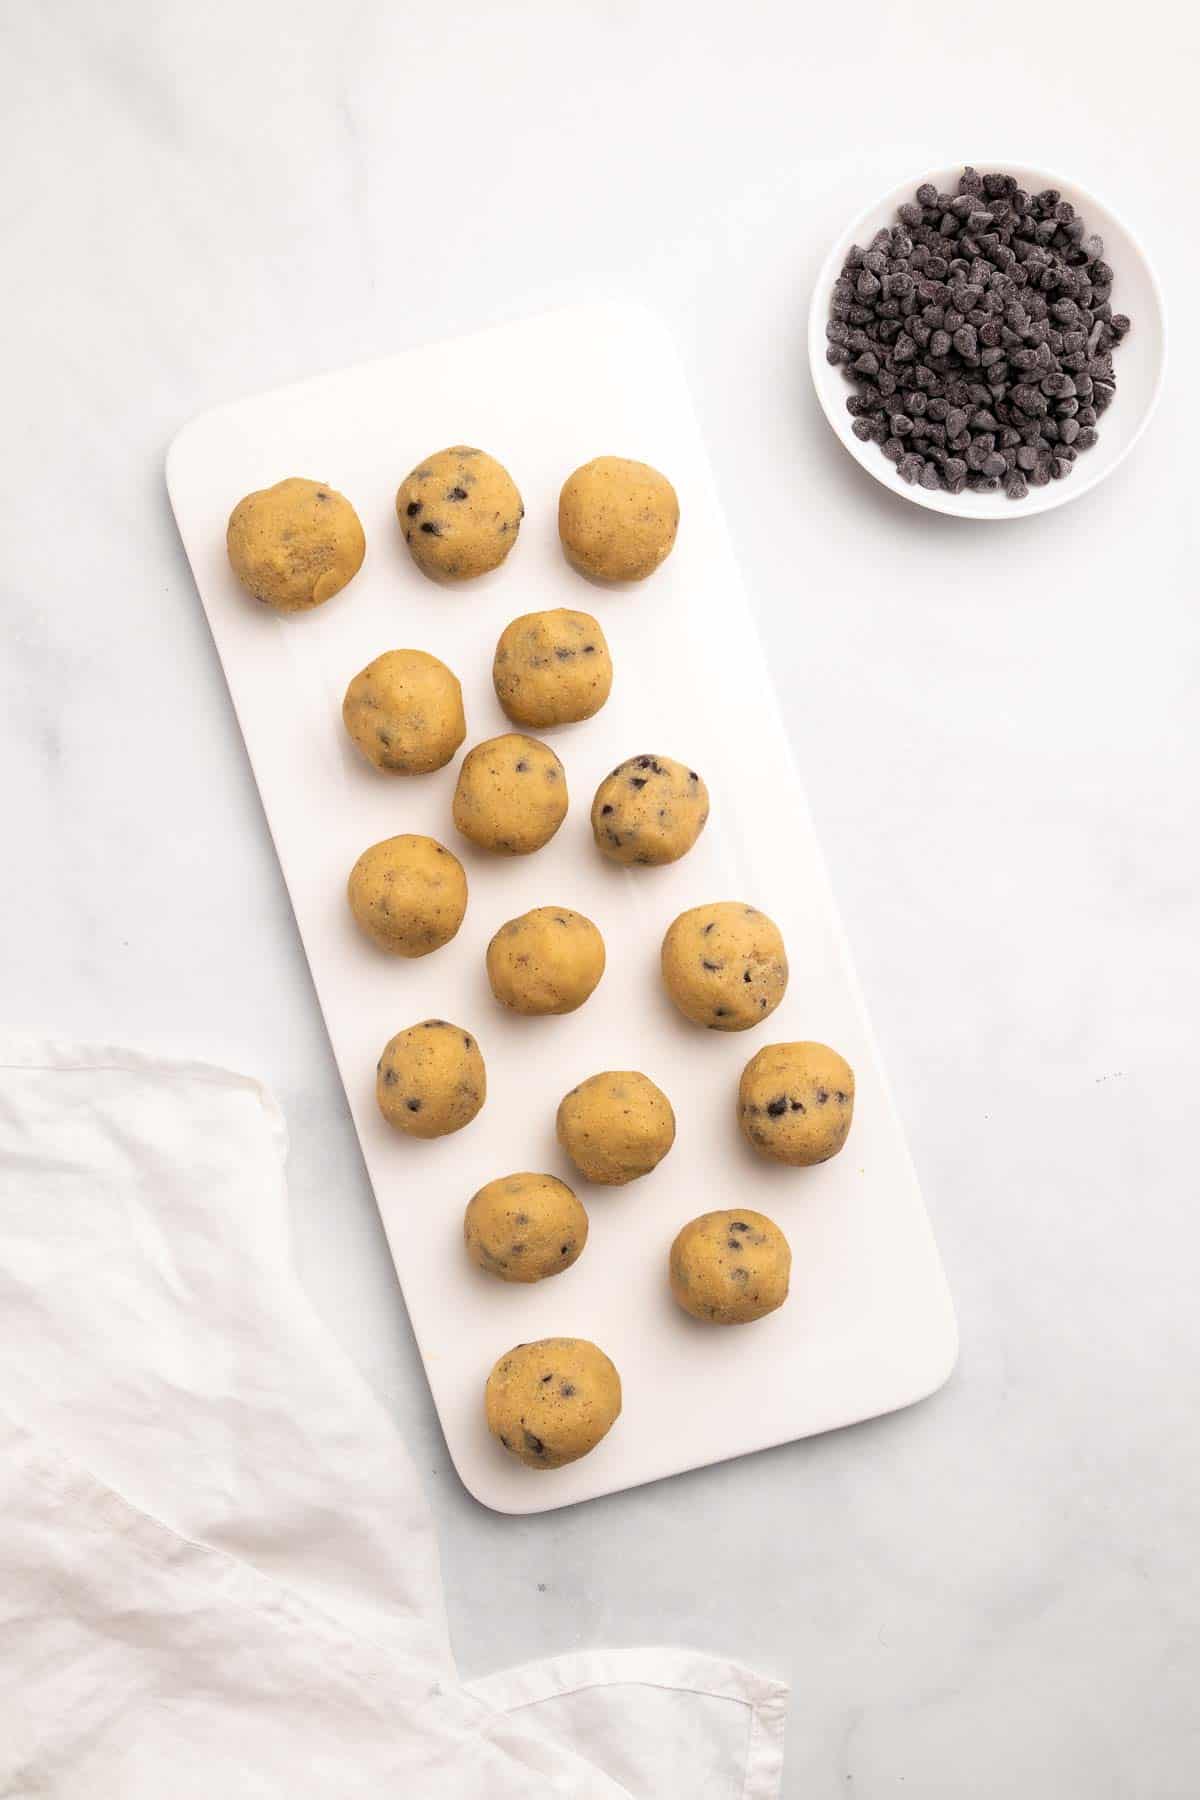 Cookie dough balls on a serving tray next to a ramekin of chocolate chips